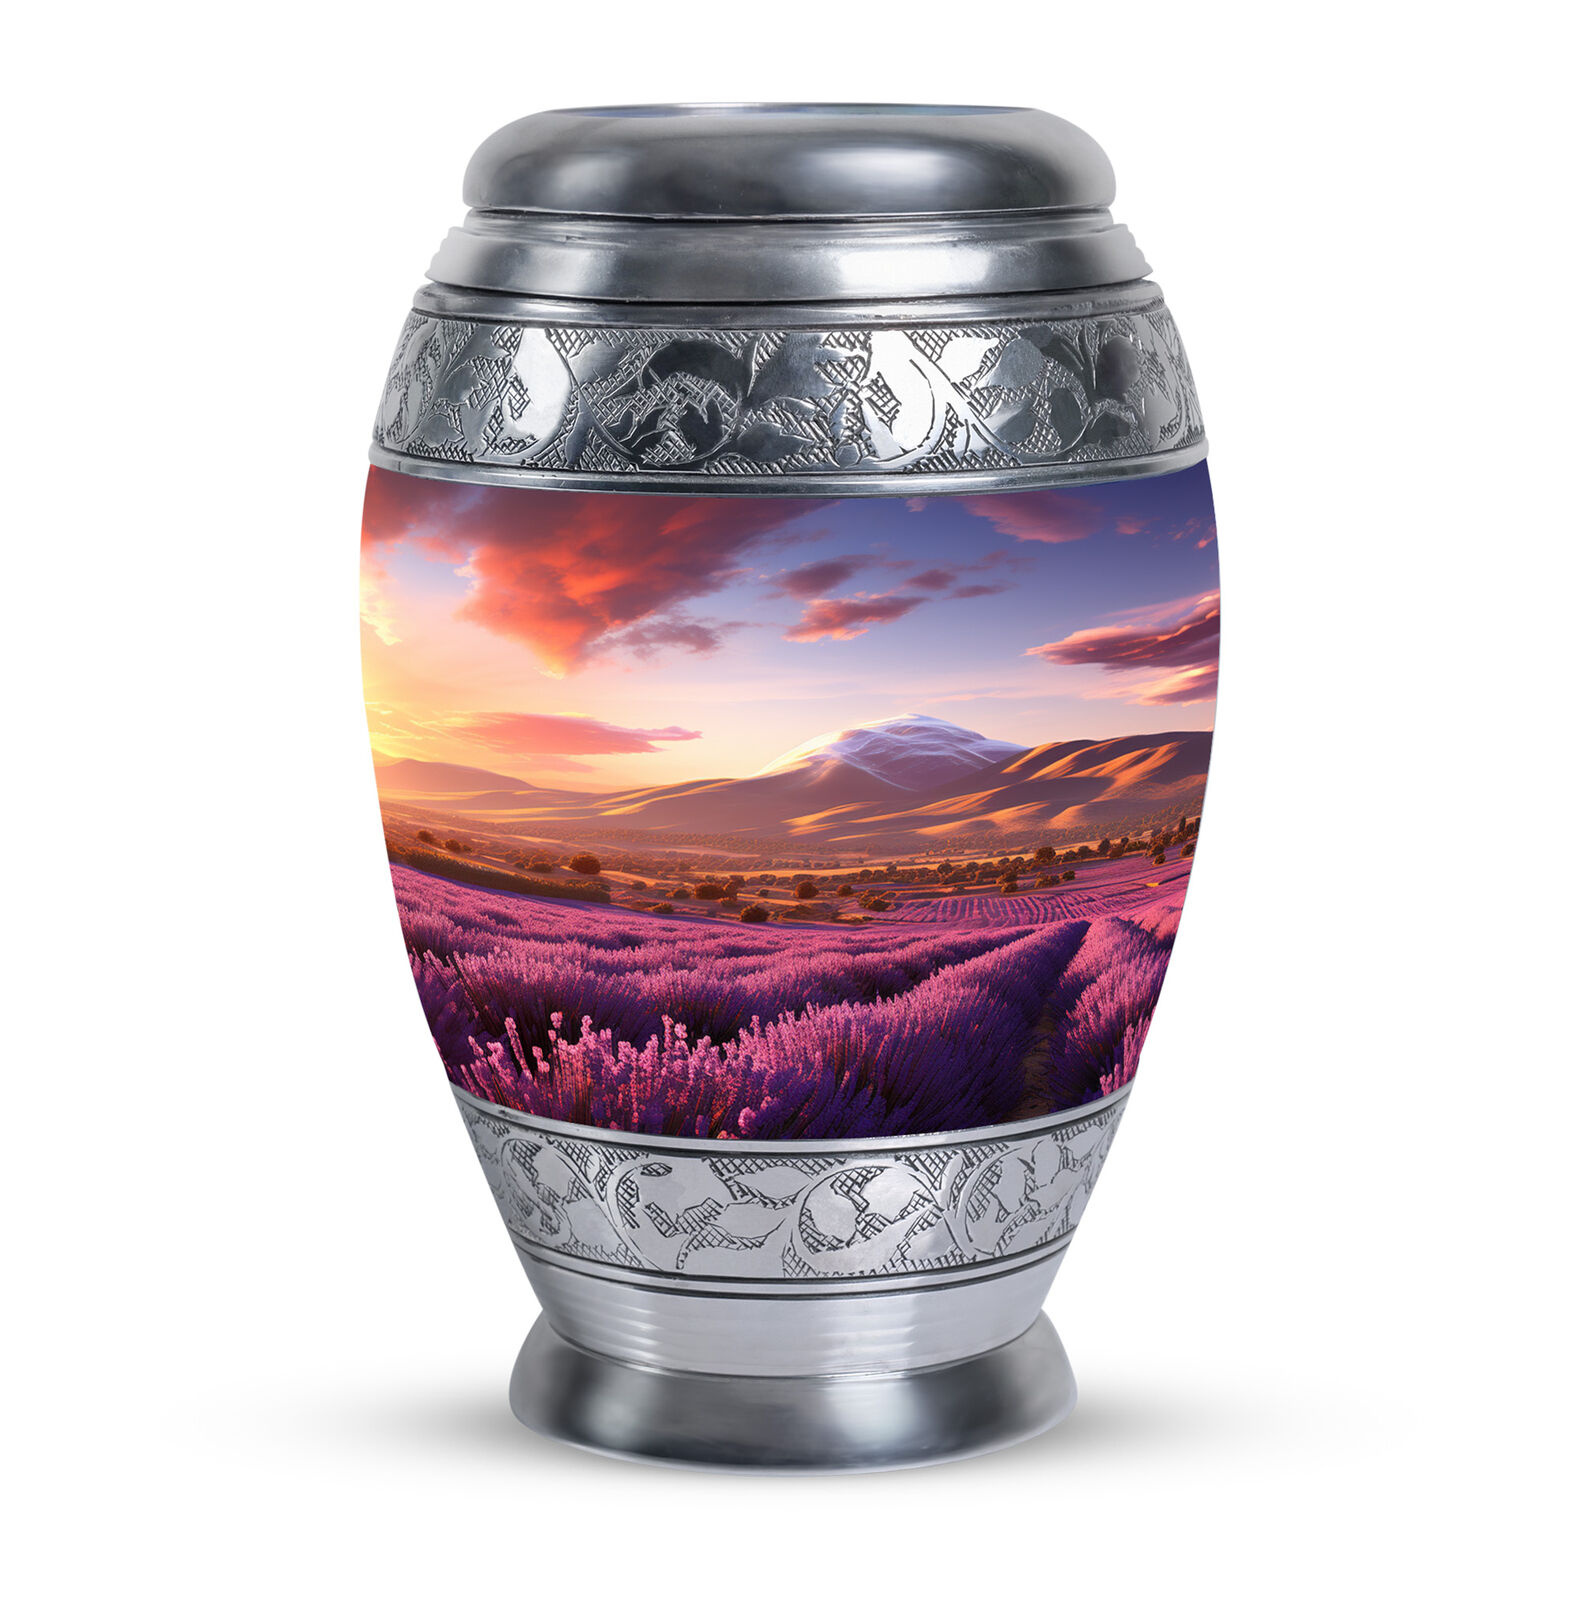 Lavender Fields at Sunset Cremation Urn Human Ashes Large Urns For Adult